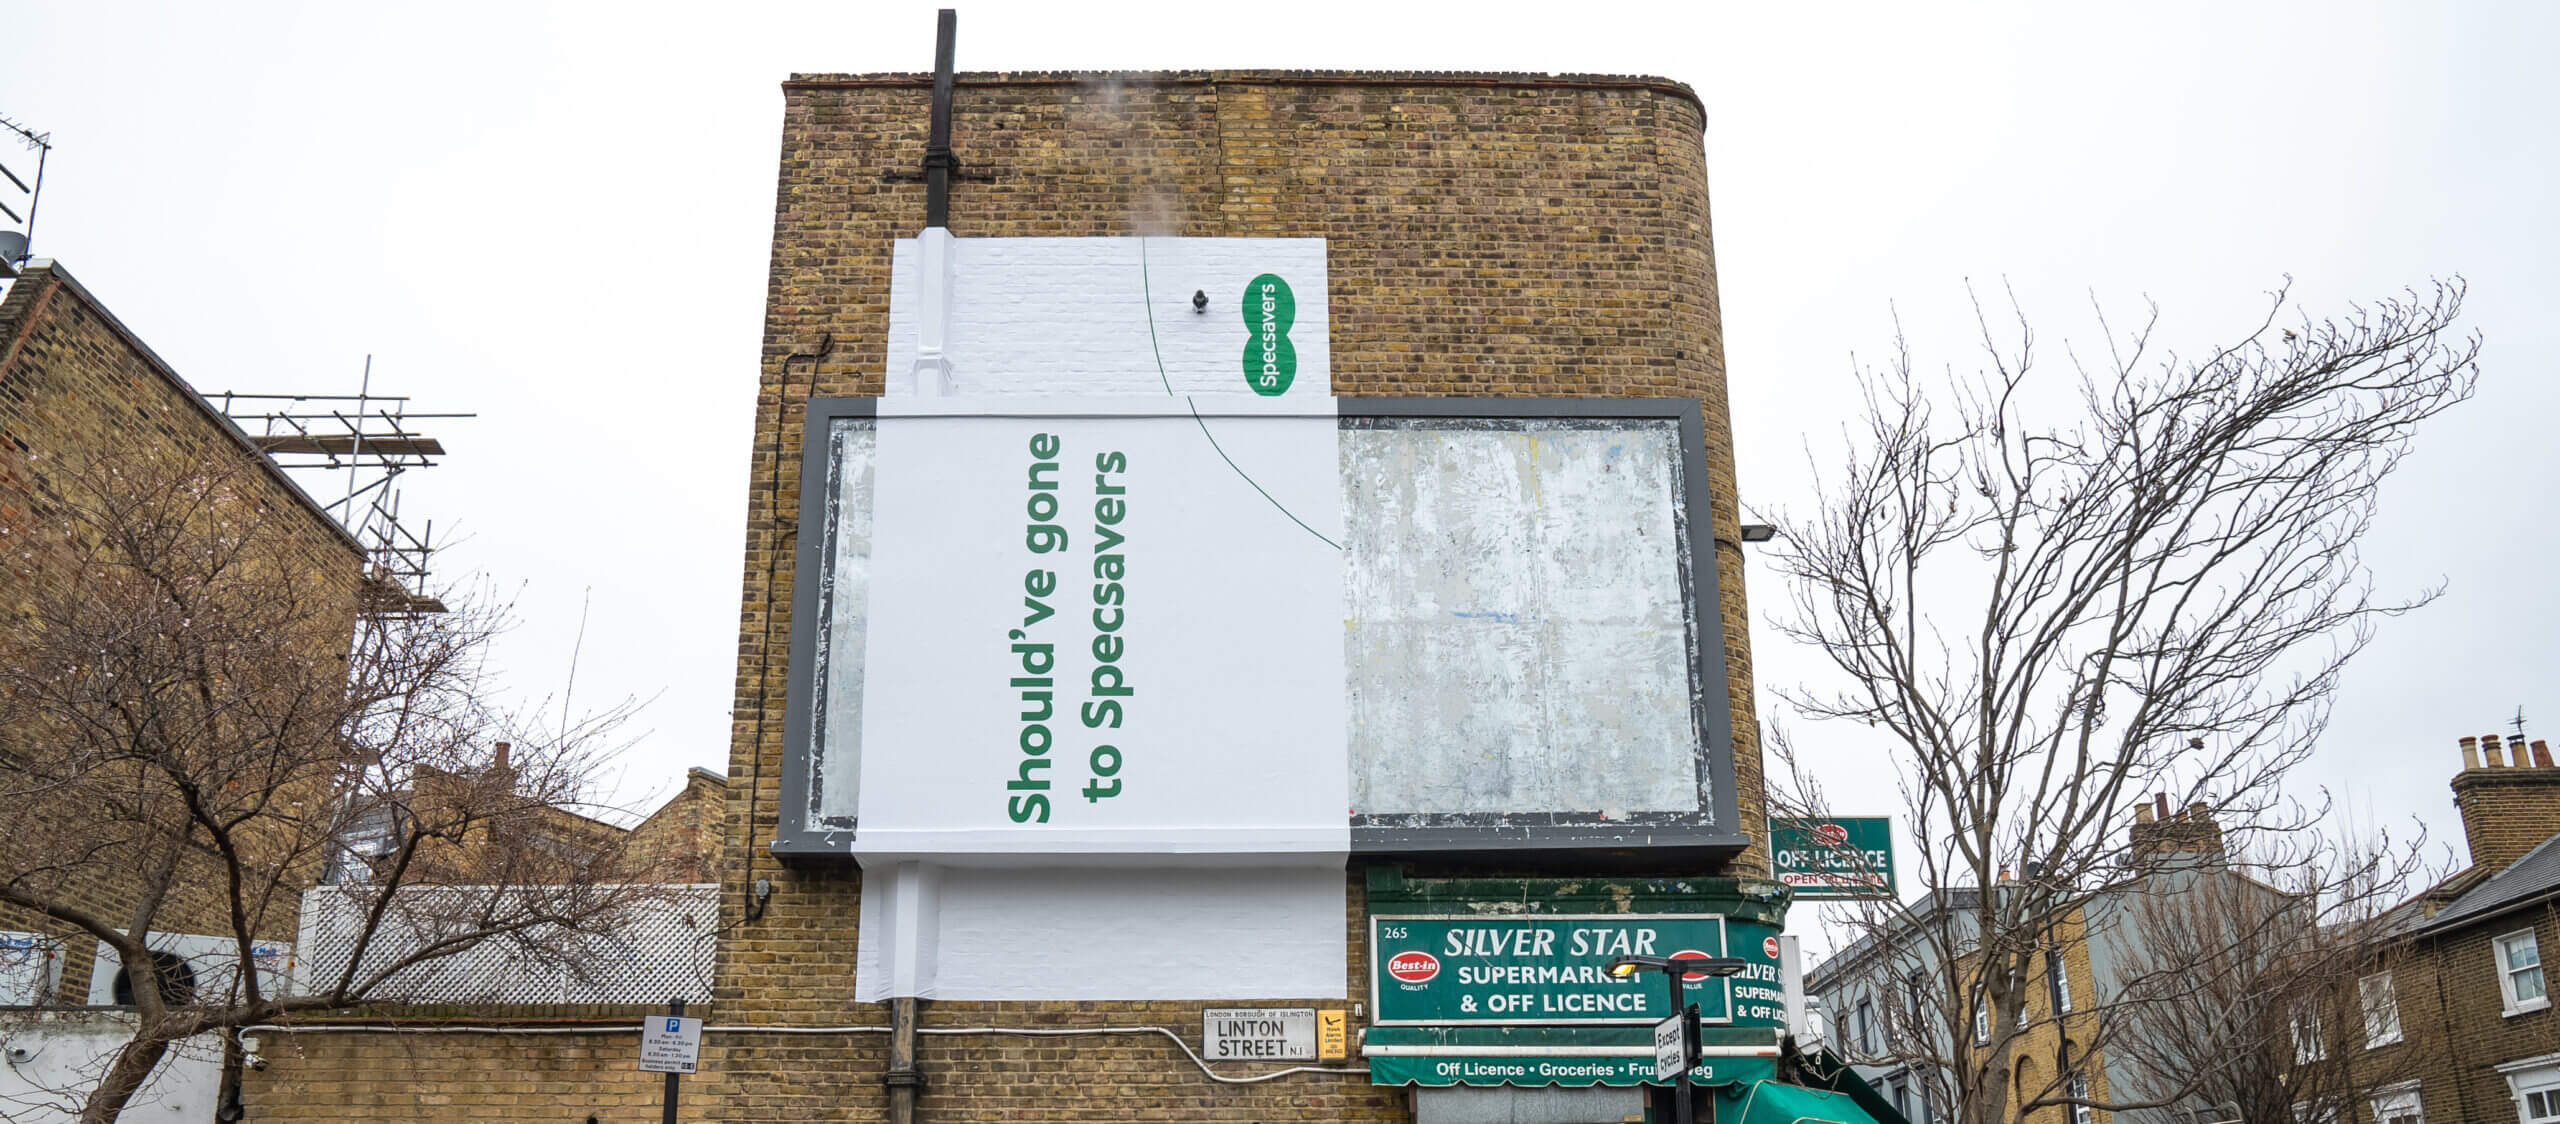 ‘Dodgy Install’ a 48-sheet poster that had also been installed at a 180-degree angle, however this time it is now covering a drainpipe.